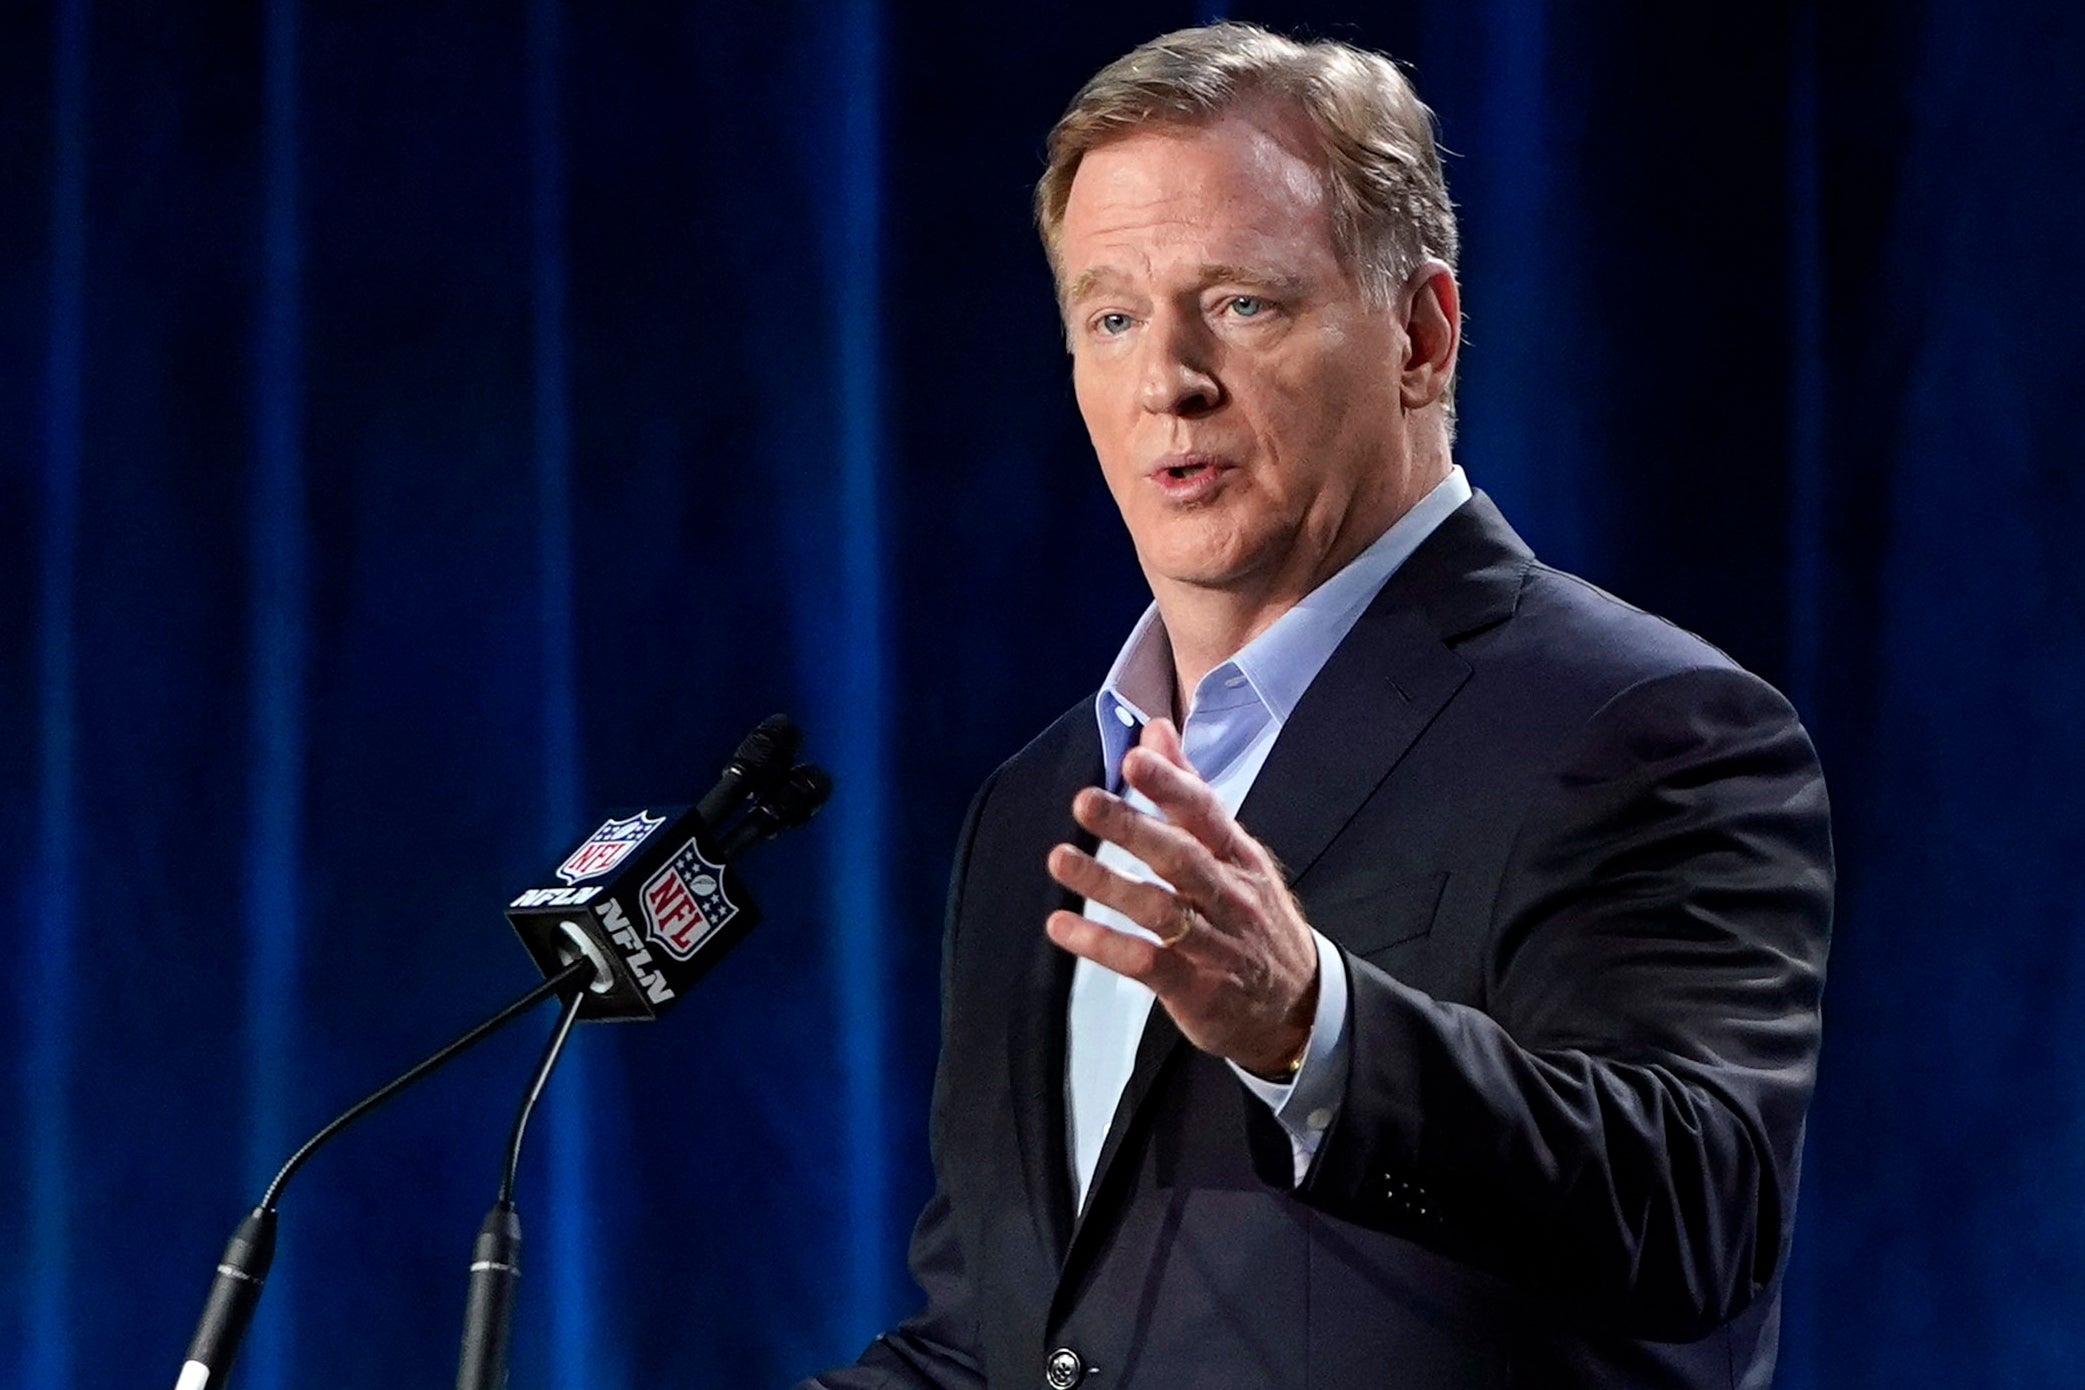 gets Thursday night games, NFL nearly doubles TV deal NFL